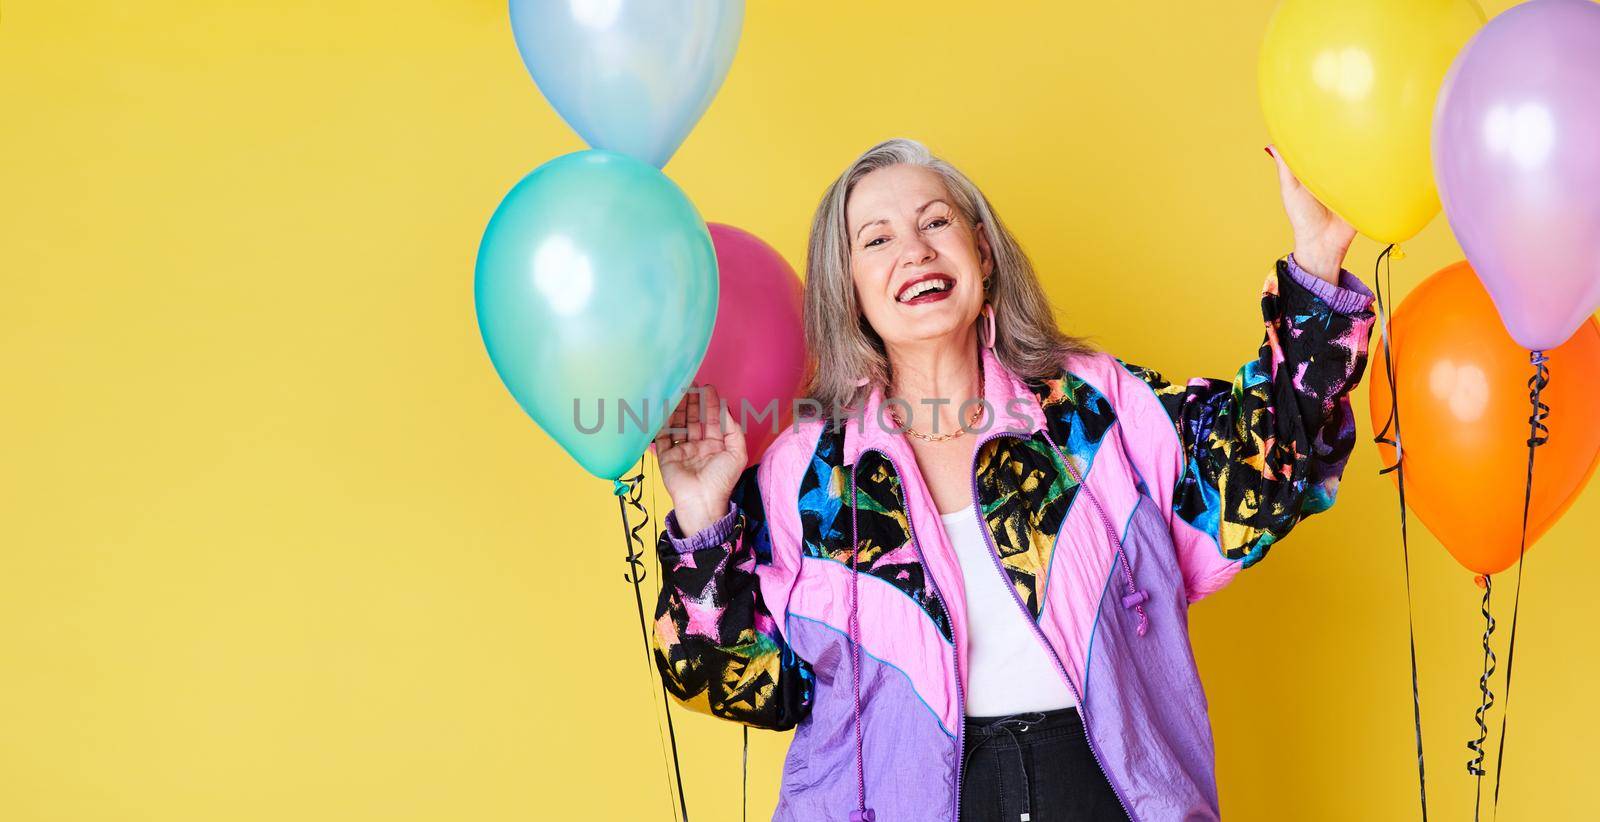 Portrait of a cheerful and stylish senior woman posing with balloons against a yellow background.